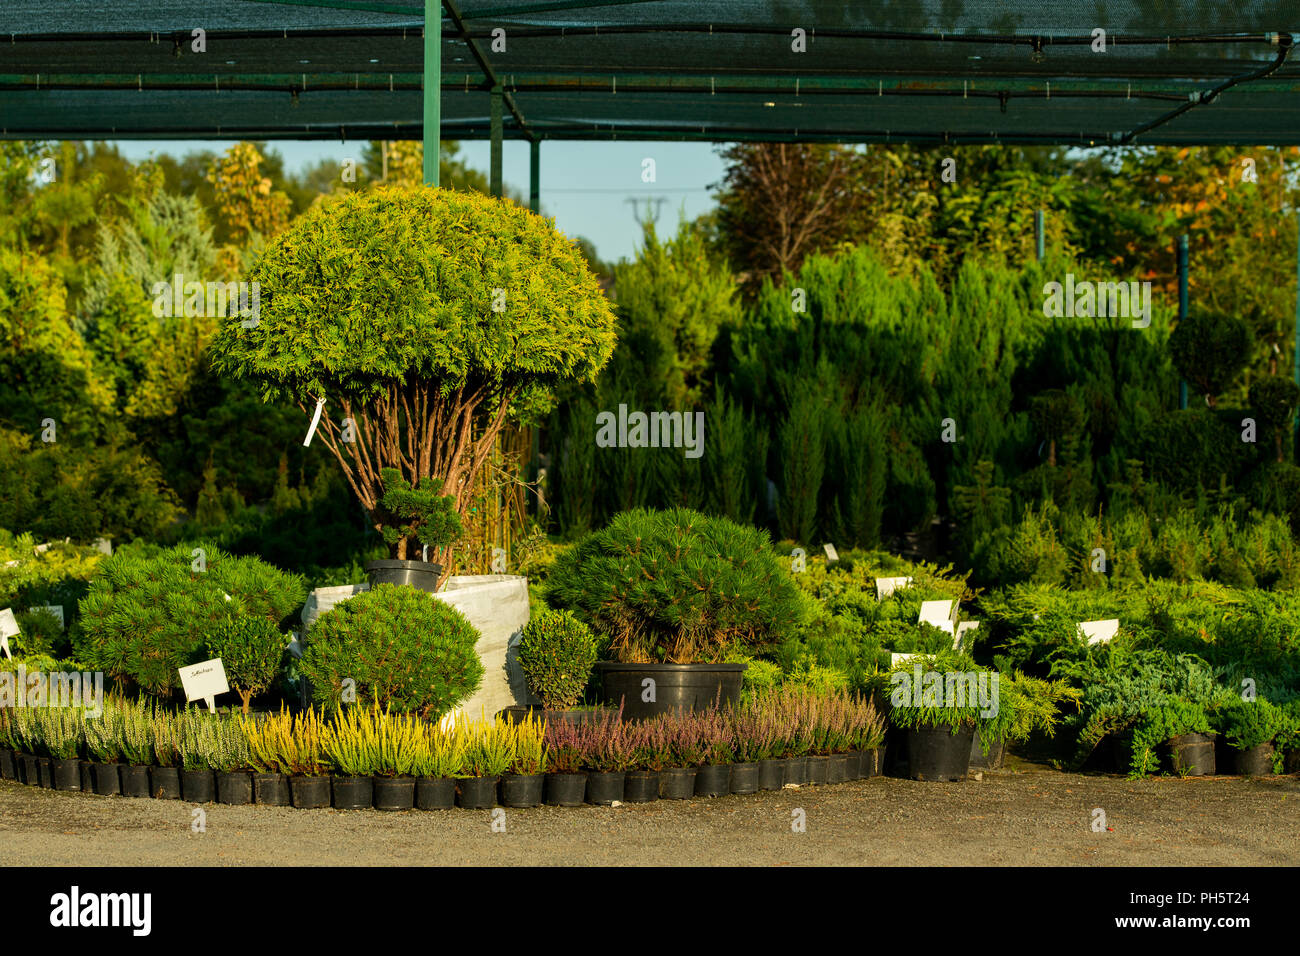 Bushes In Tubs For Sale Stock Photo 217102204 Alamy